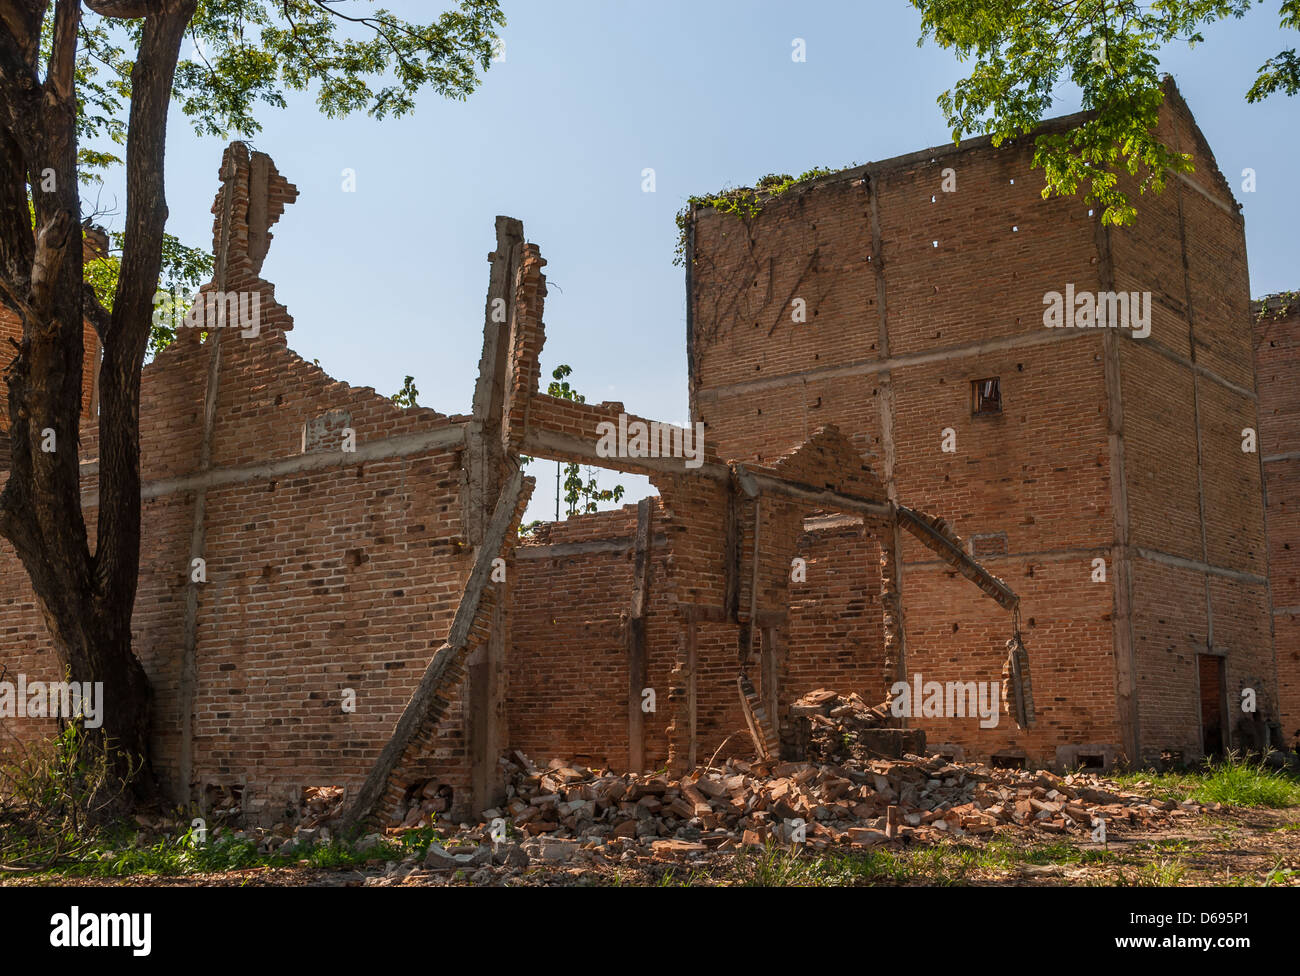 Abandoned building on a rural meadow with big tree Stock Photo